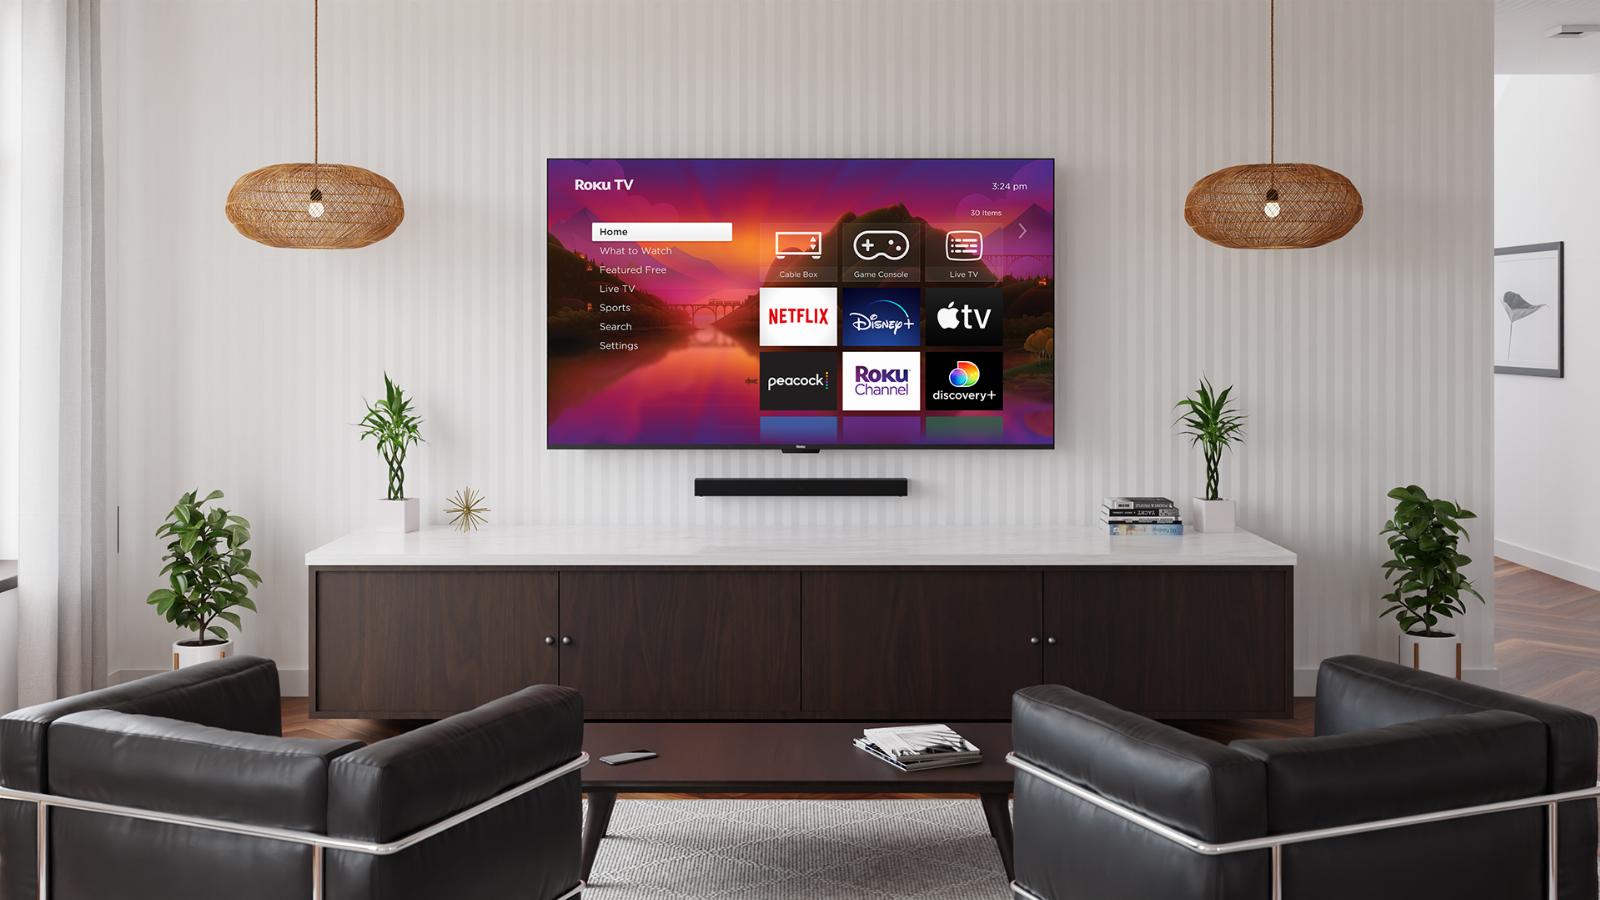 Roku announces its first live sports deal